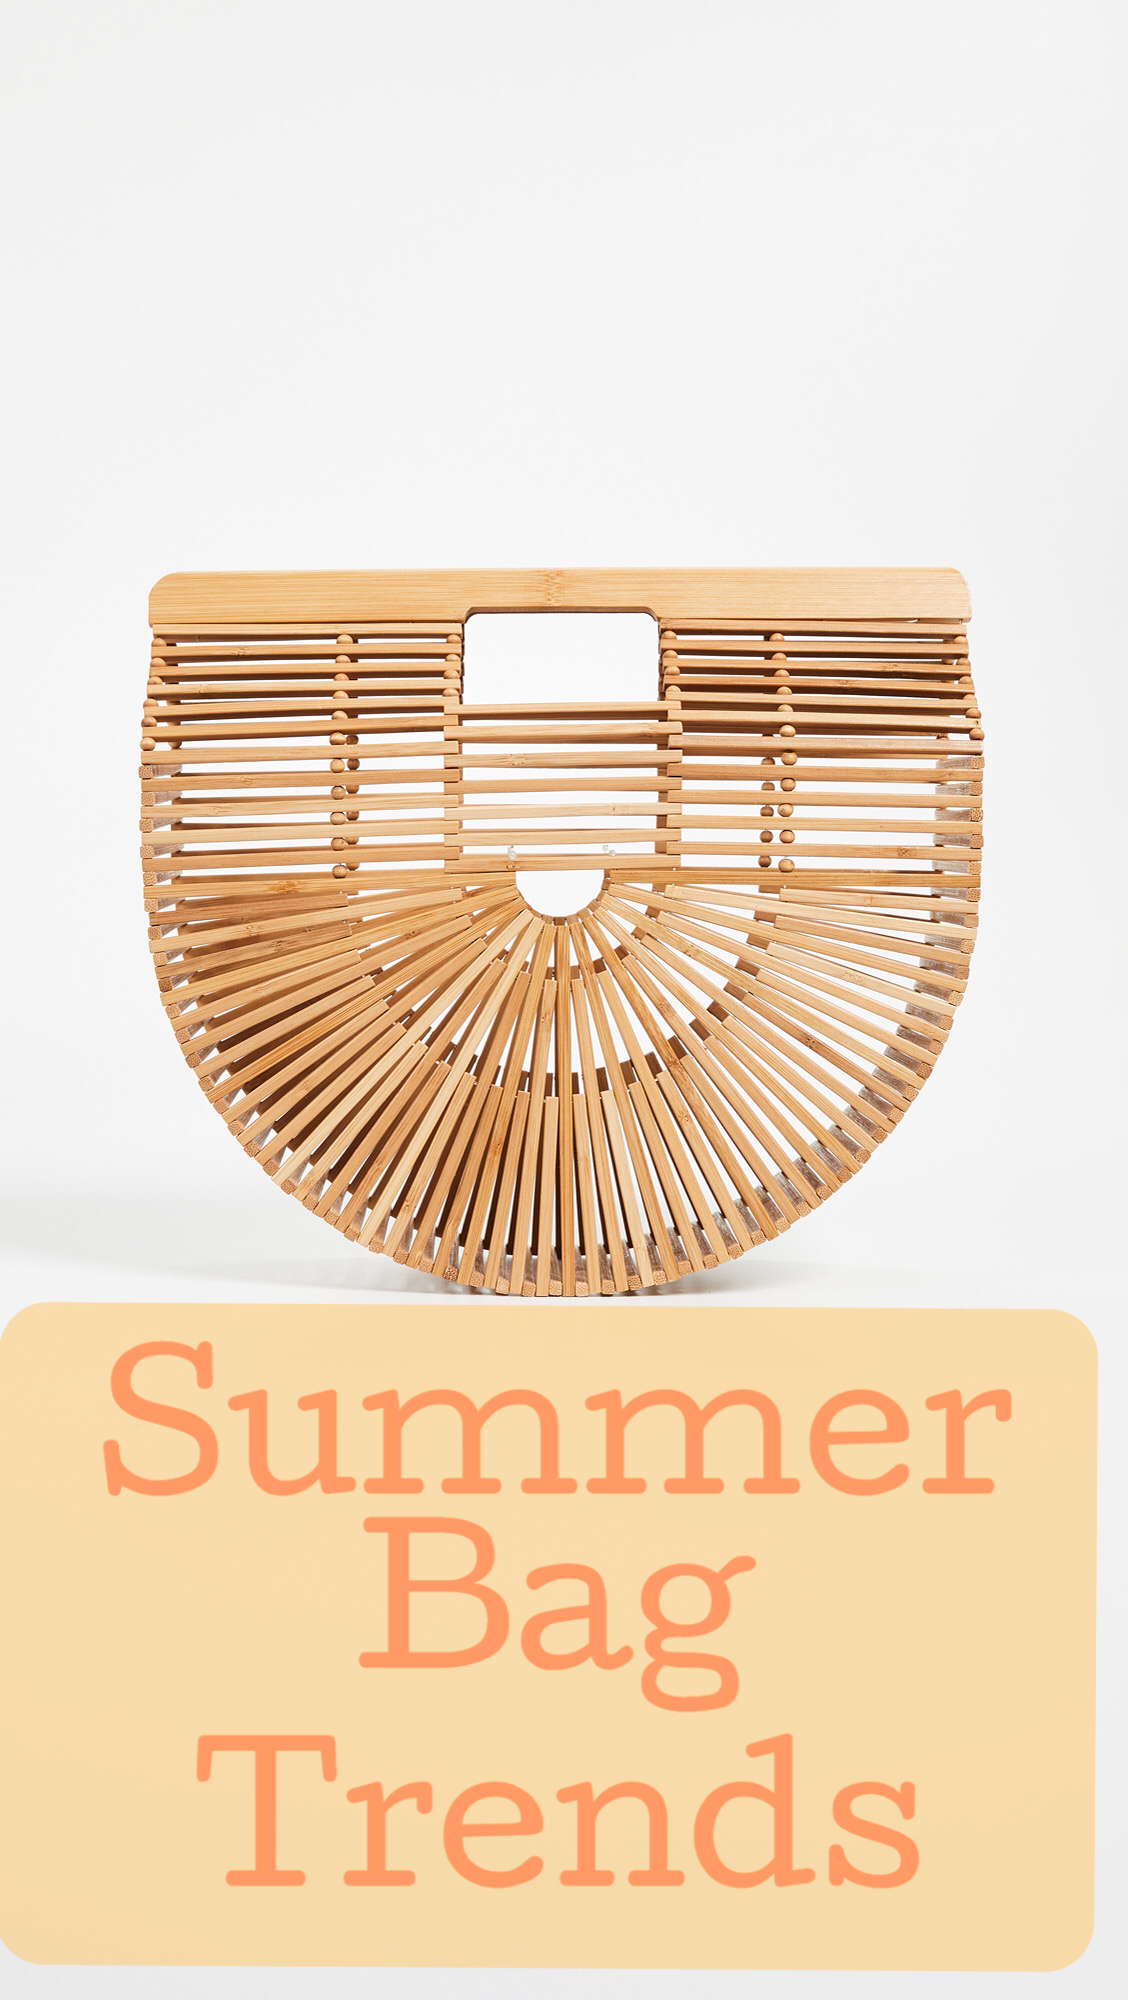 The Bag Trend that everyone is wearing in spring and summer 2018. Bamboo and wicker bags are on trend. The original was the Cult Gaia Ark Bamboo Bag and it has inspired many more styles by various brands at inexpensive prices. Every fashion blogger has a various version of the bamboo or wicker bag.